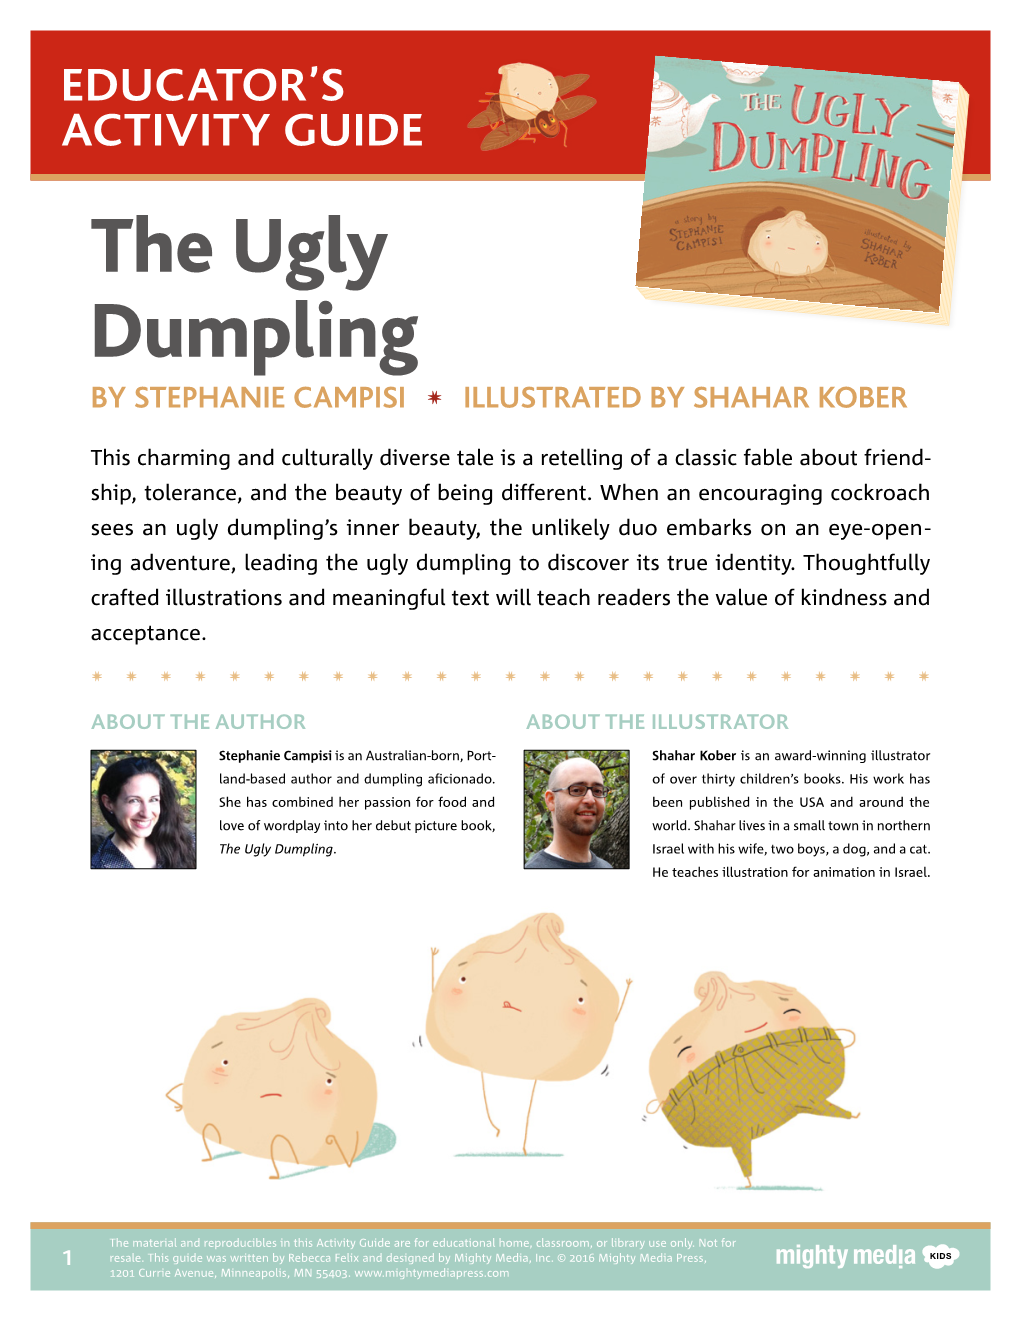 The Ugly Dumpling by STEPHANIE CAMPISI ✷ ILLUSTRATED by SHAHAR KOBER